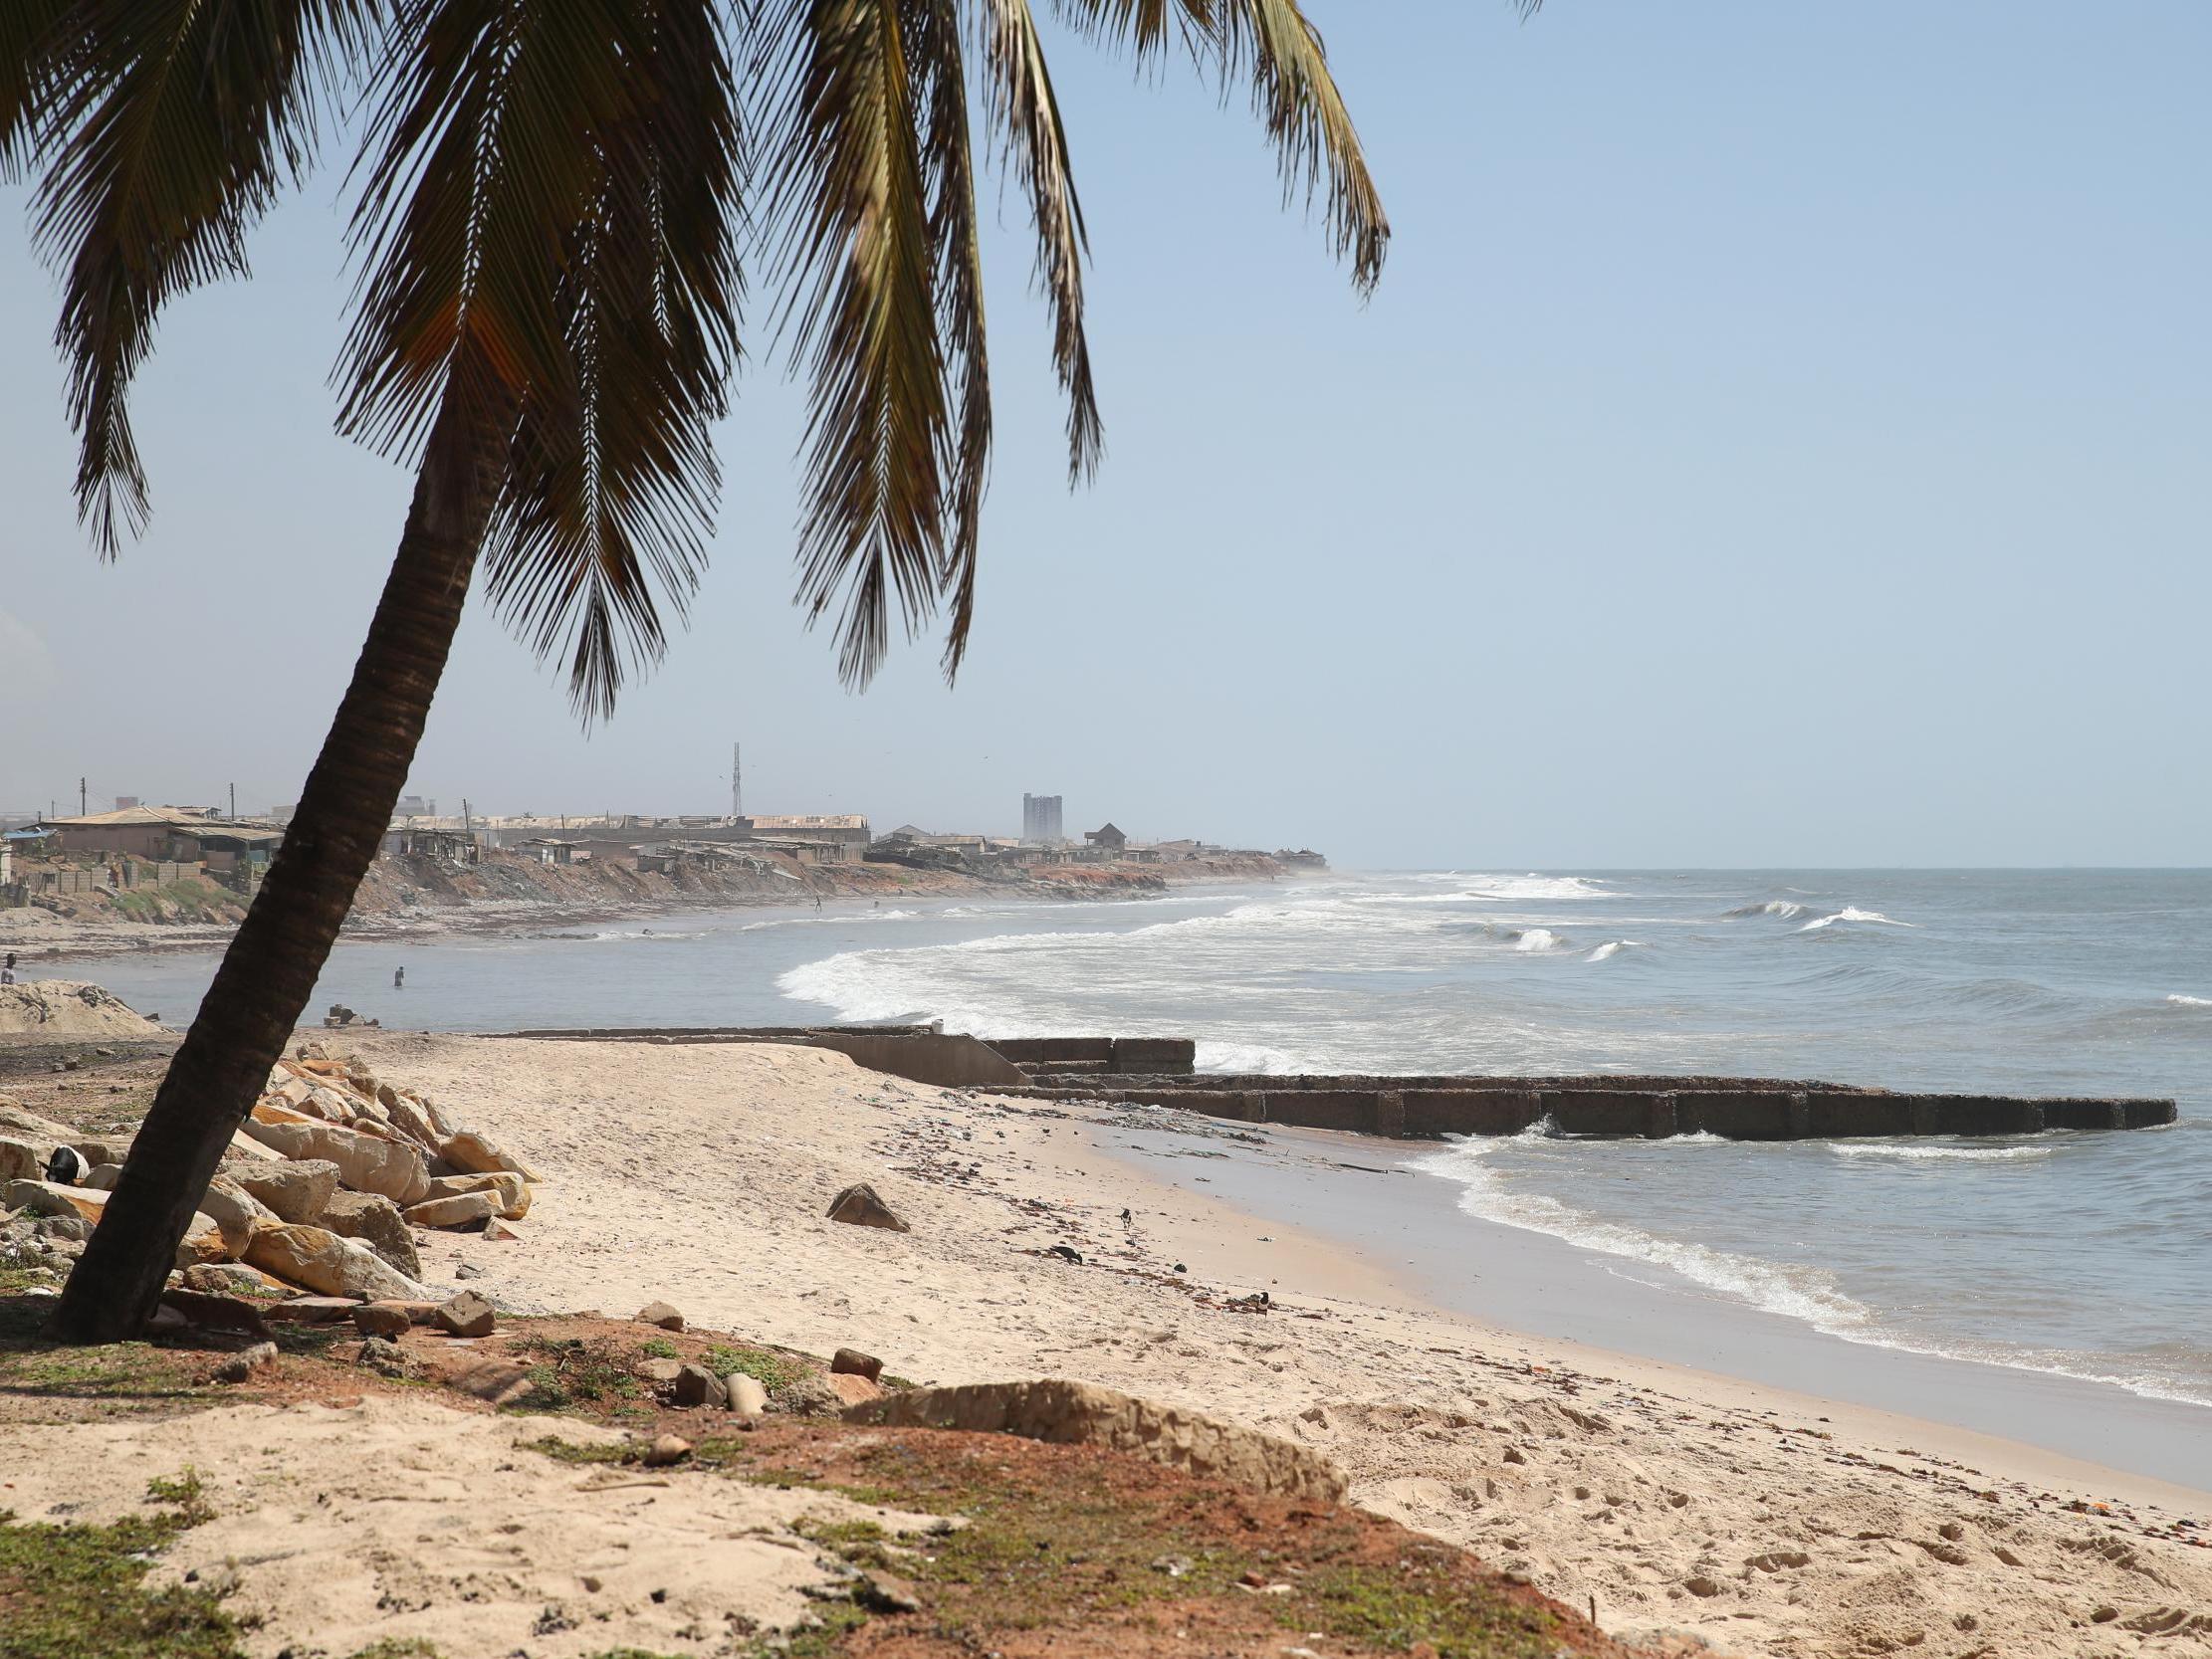 Four British schoolgirls and their teacher have been sexually assaulted in a coastal area near the Ghanaian capital of Accra